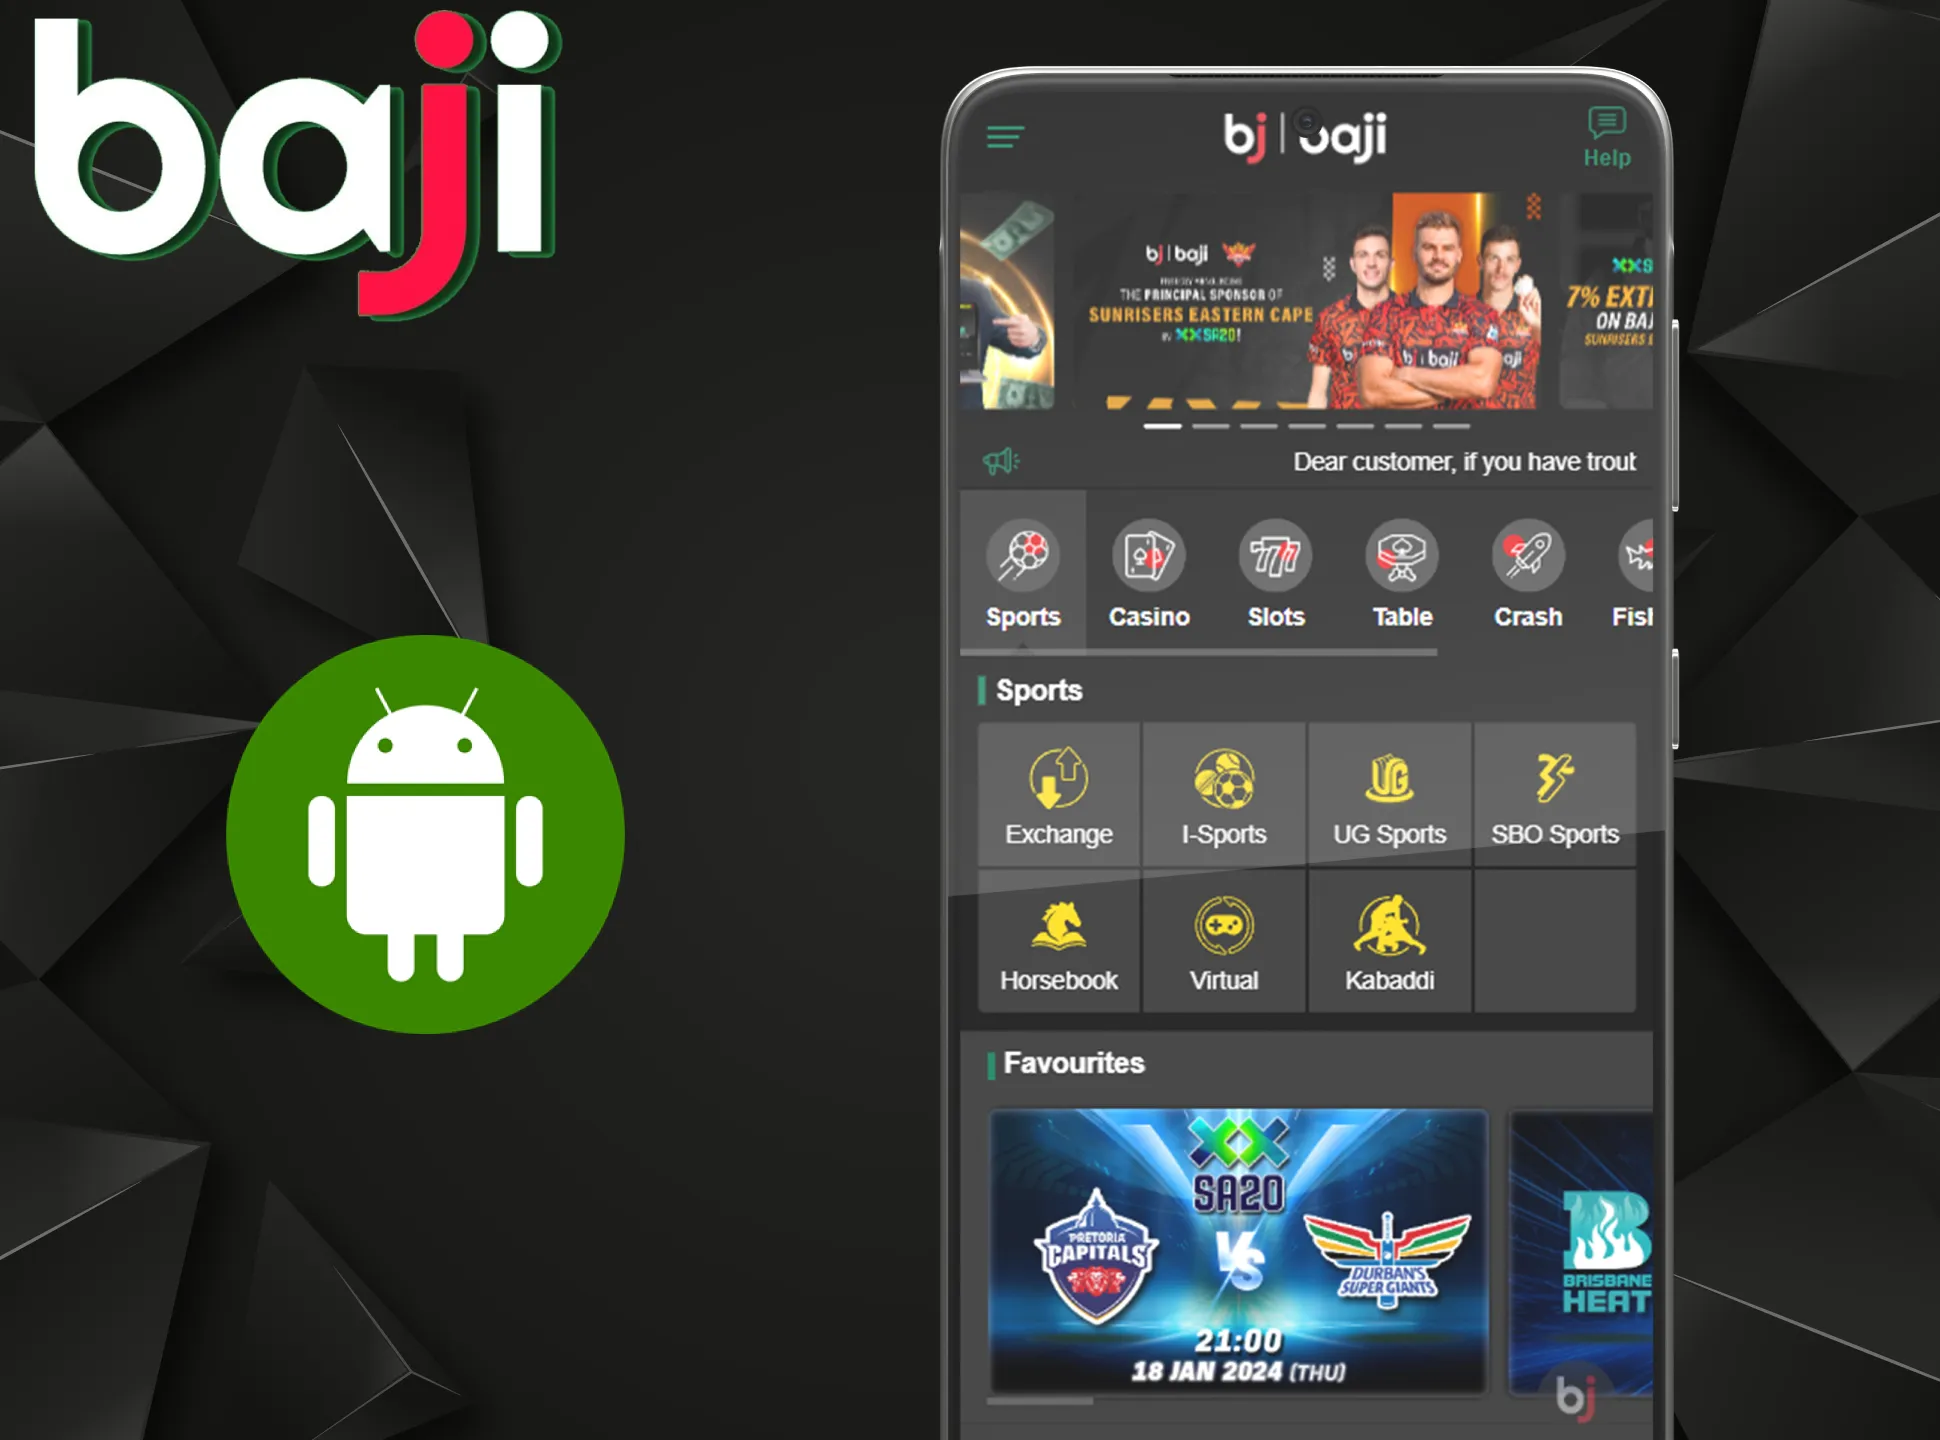 Open the Baji website on your mobile device.